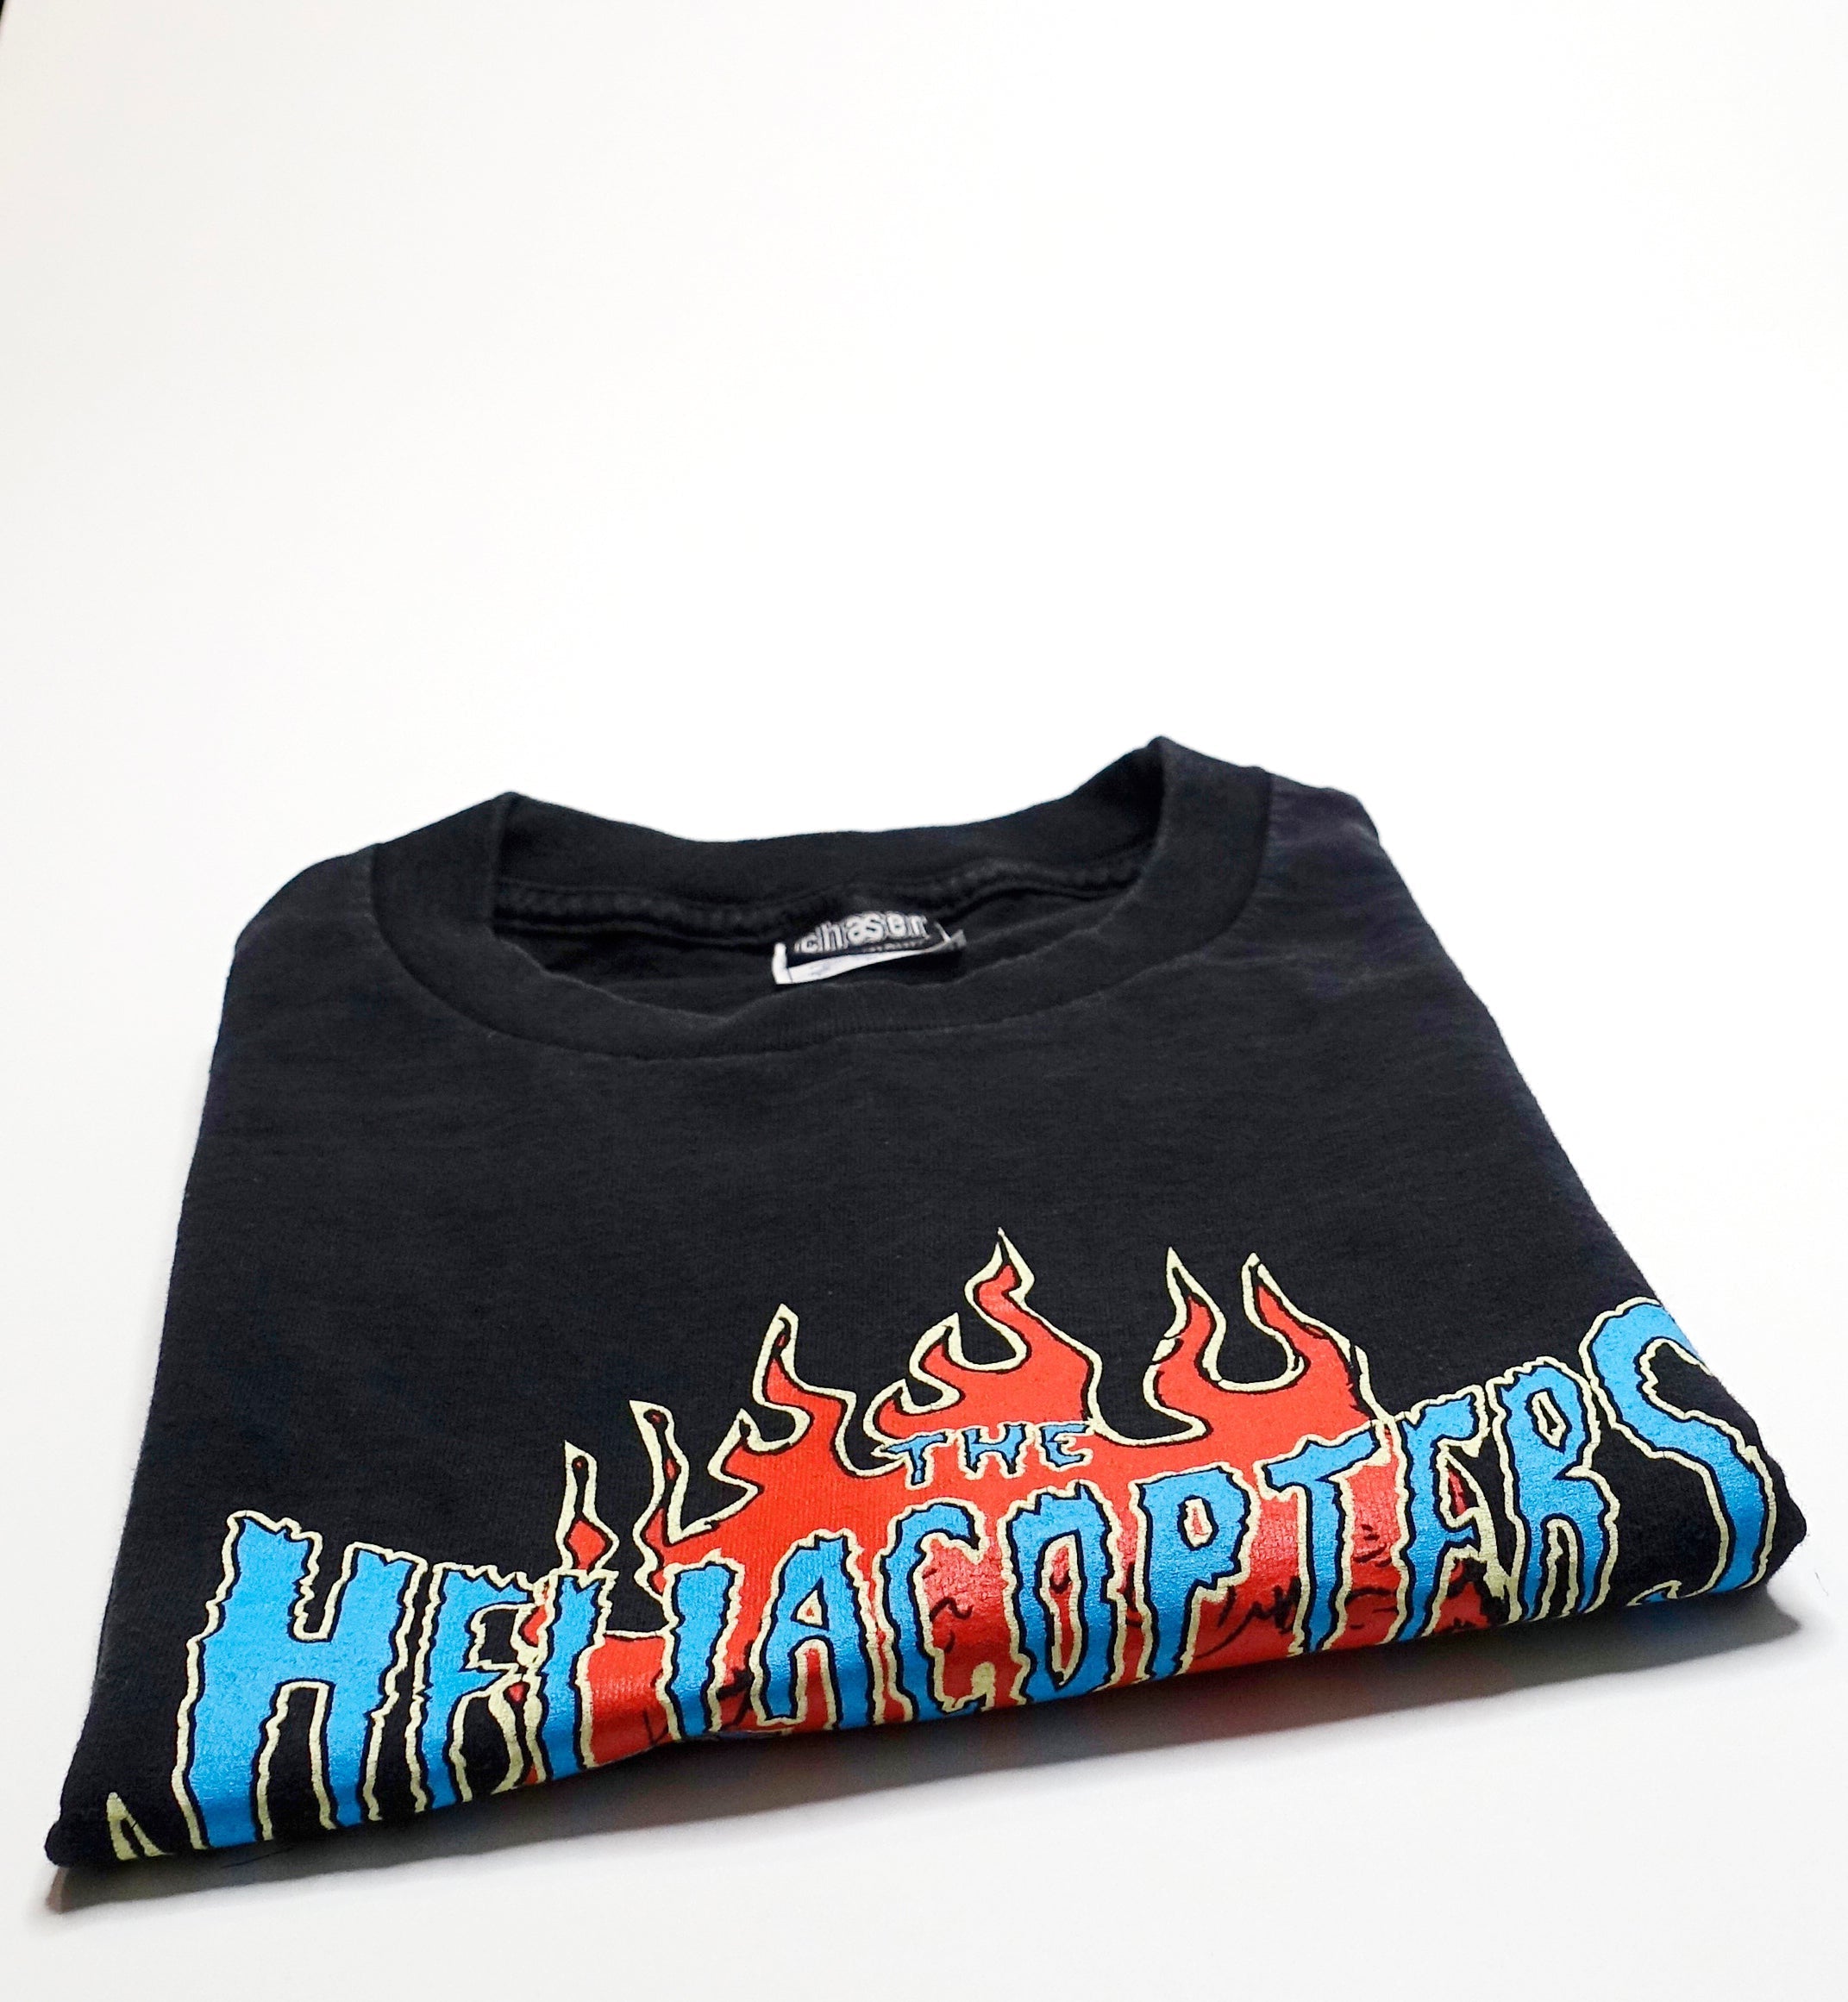 the Hellacopters - Grande Rock 1999 Tour Shirt Size Large